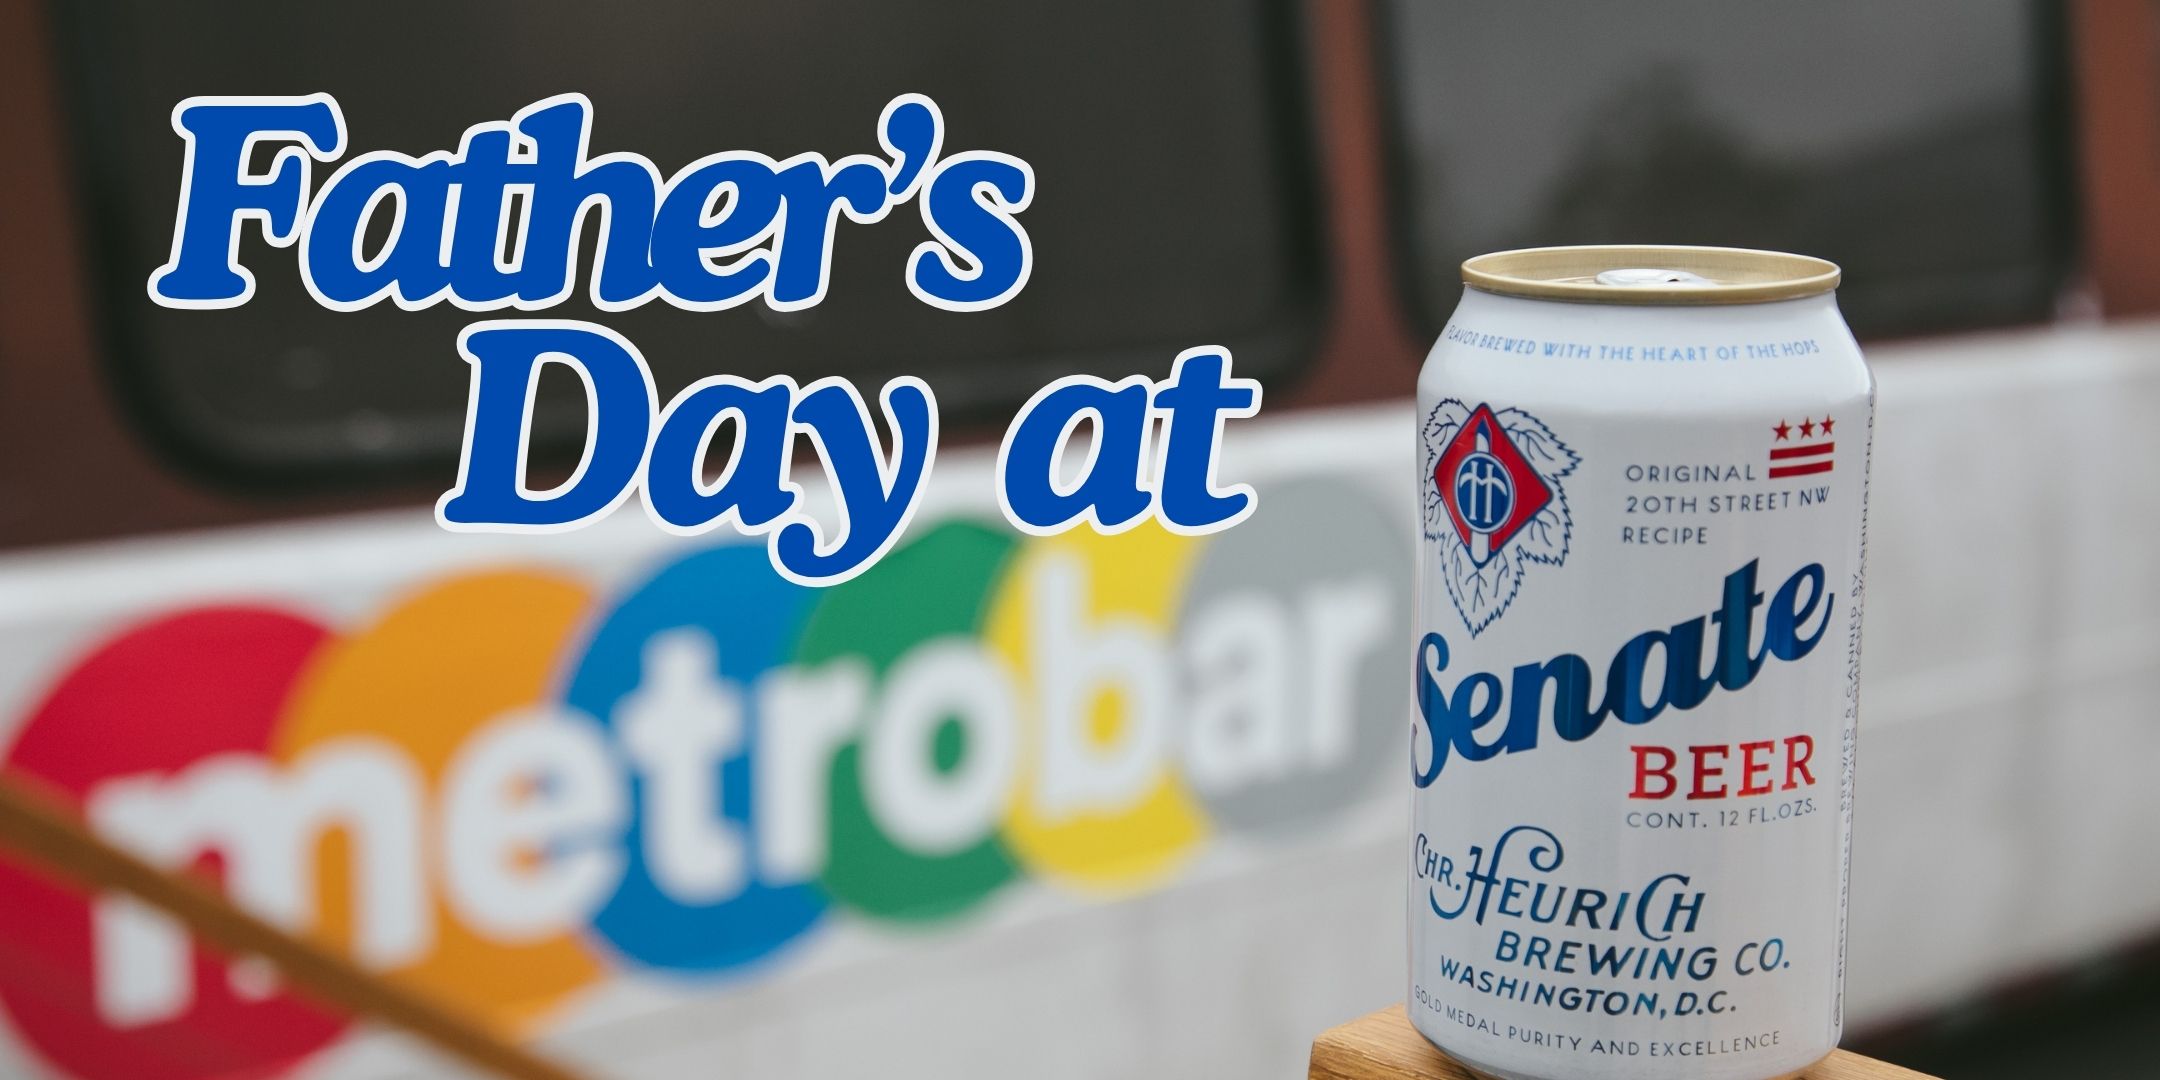 Father's Day at metrobar